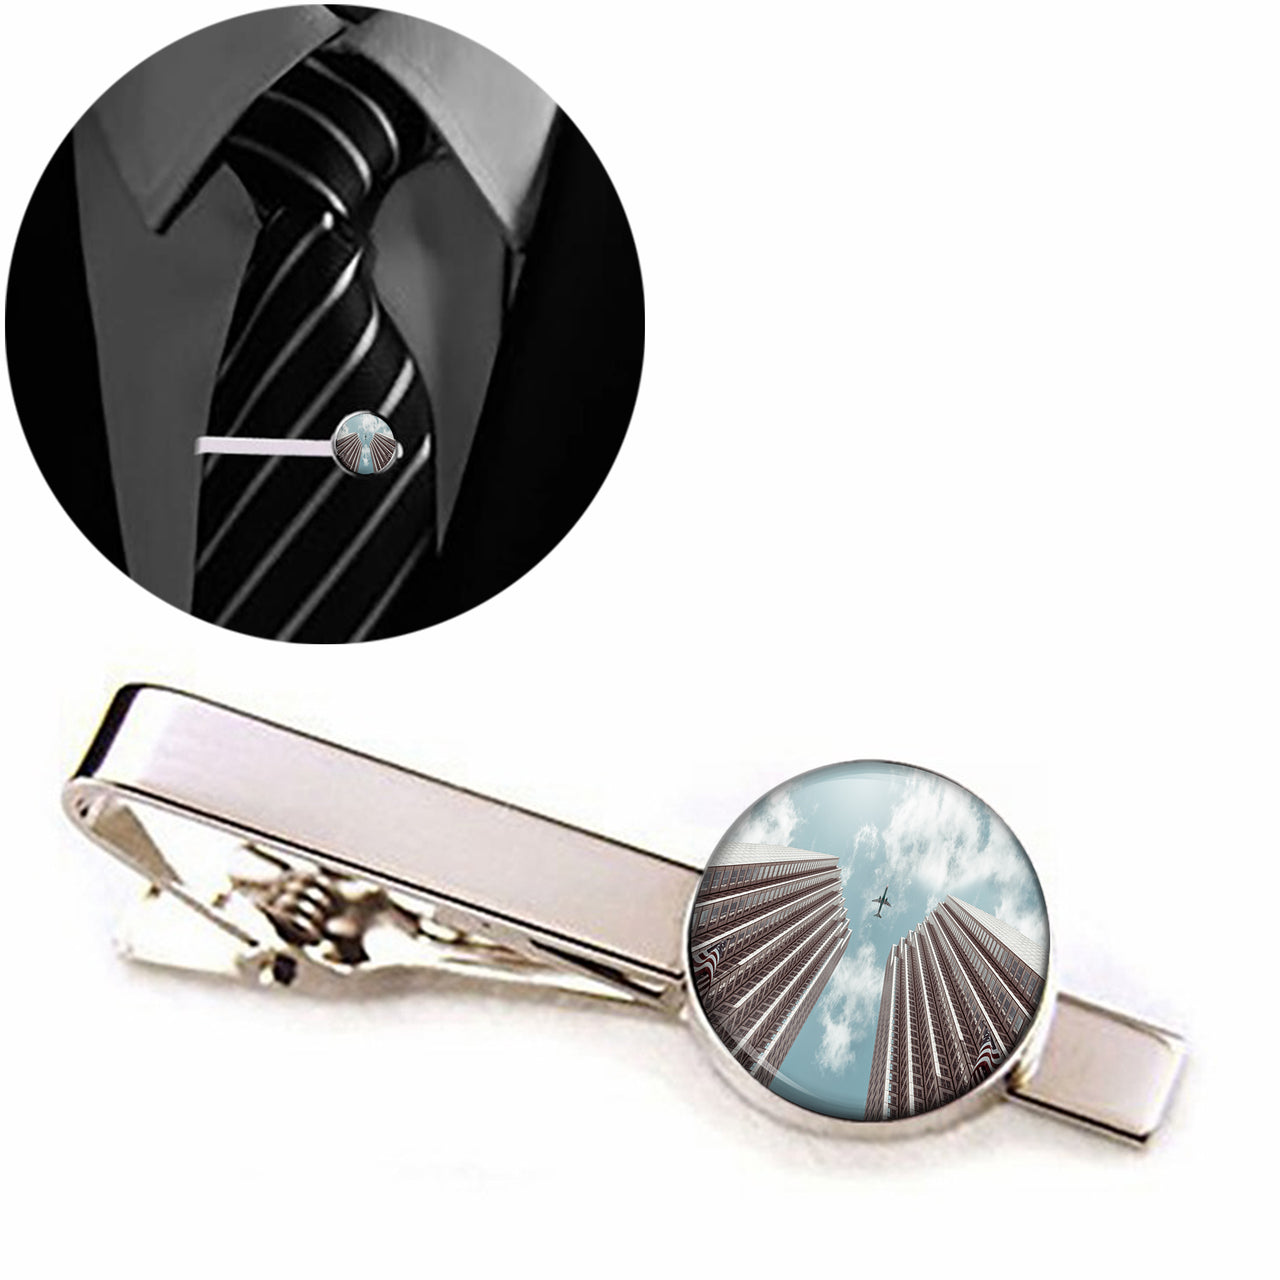 Airplane Flying over Big Buildings Designed Tie Clips